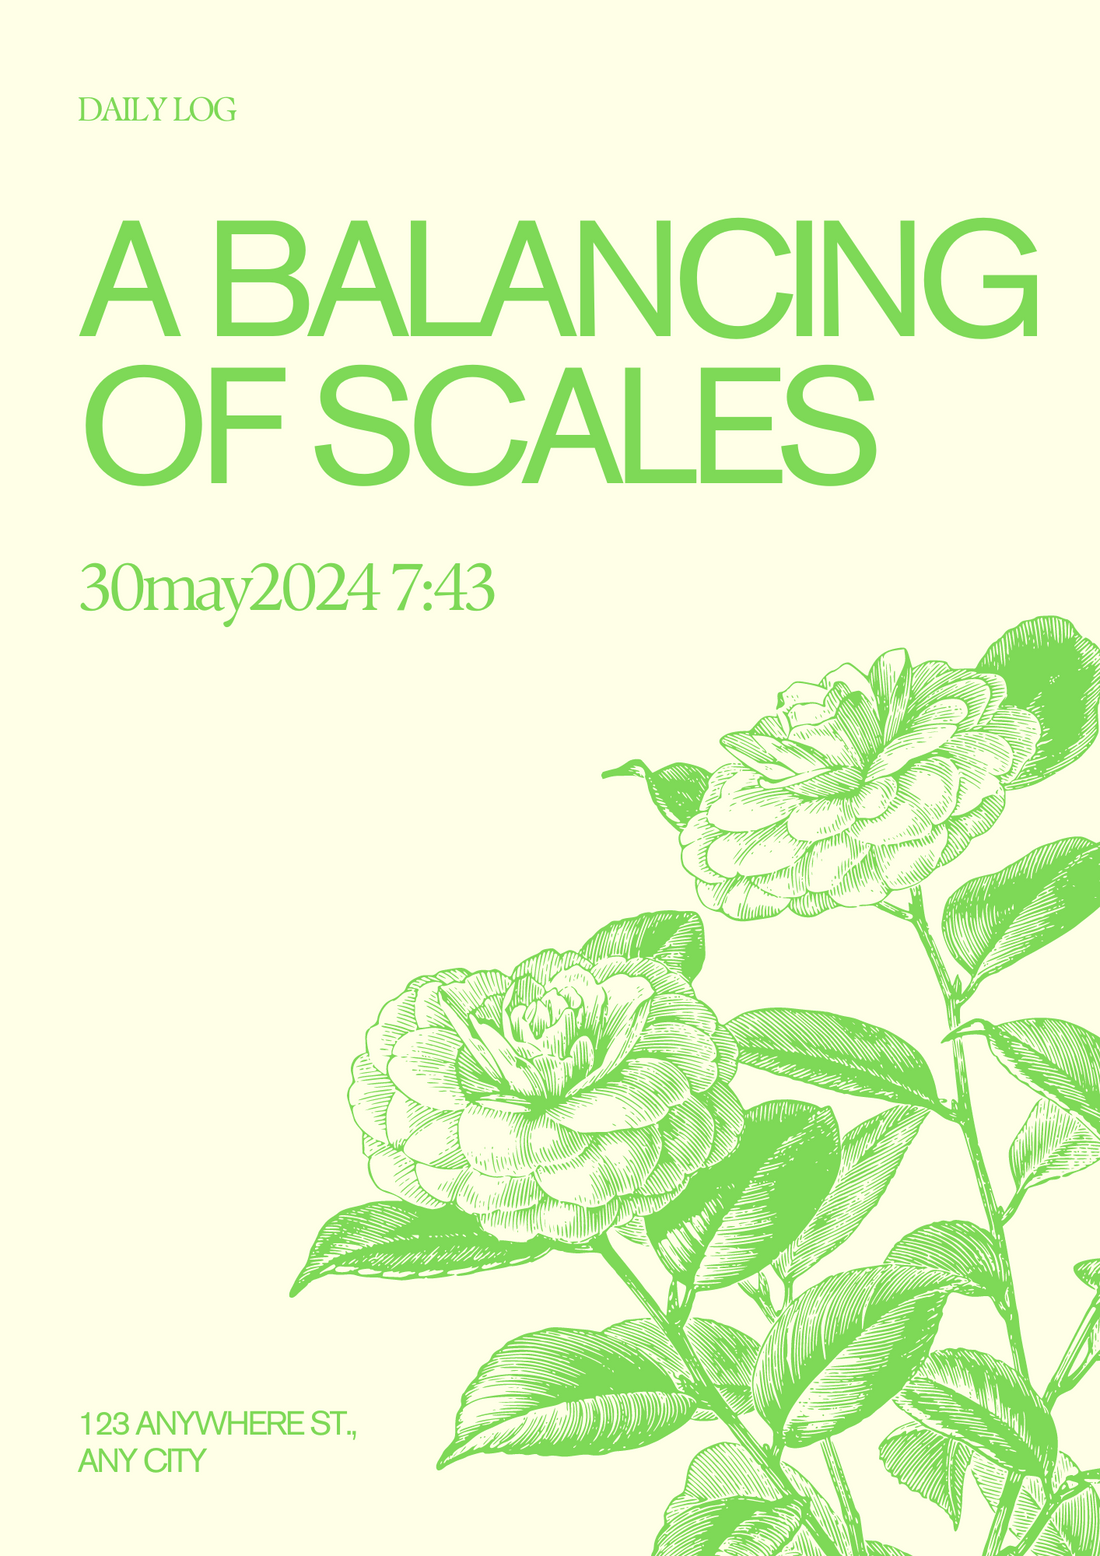 A Balancing of Scales